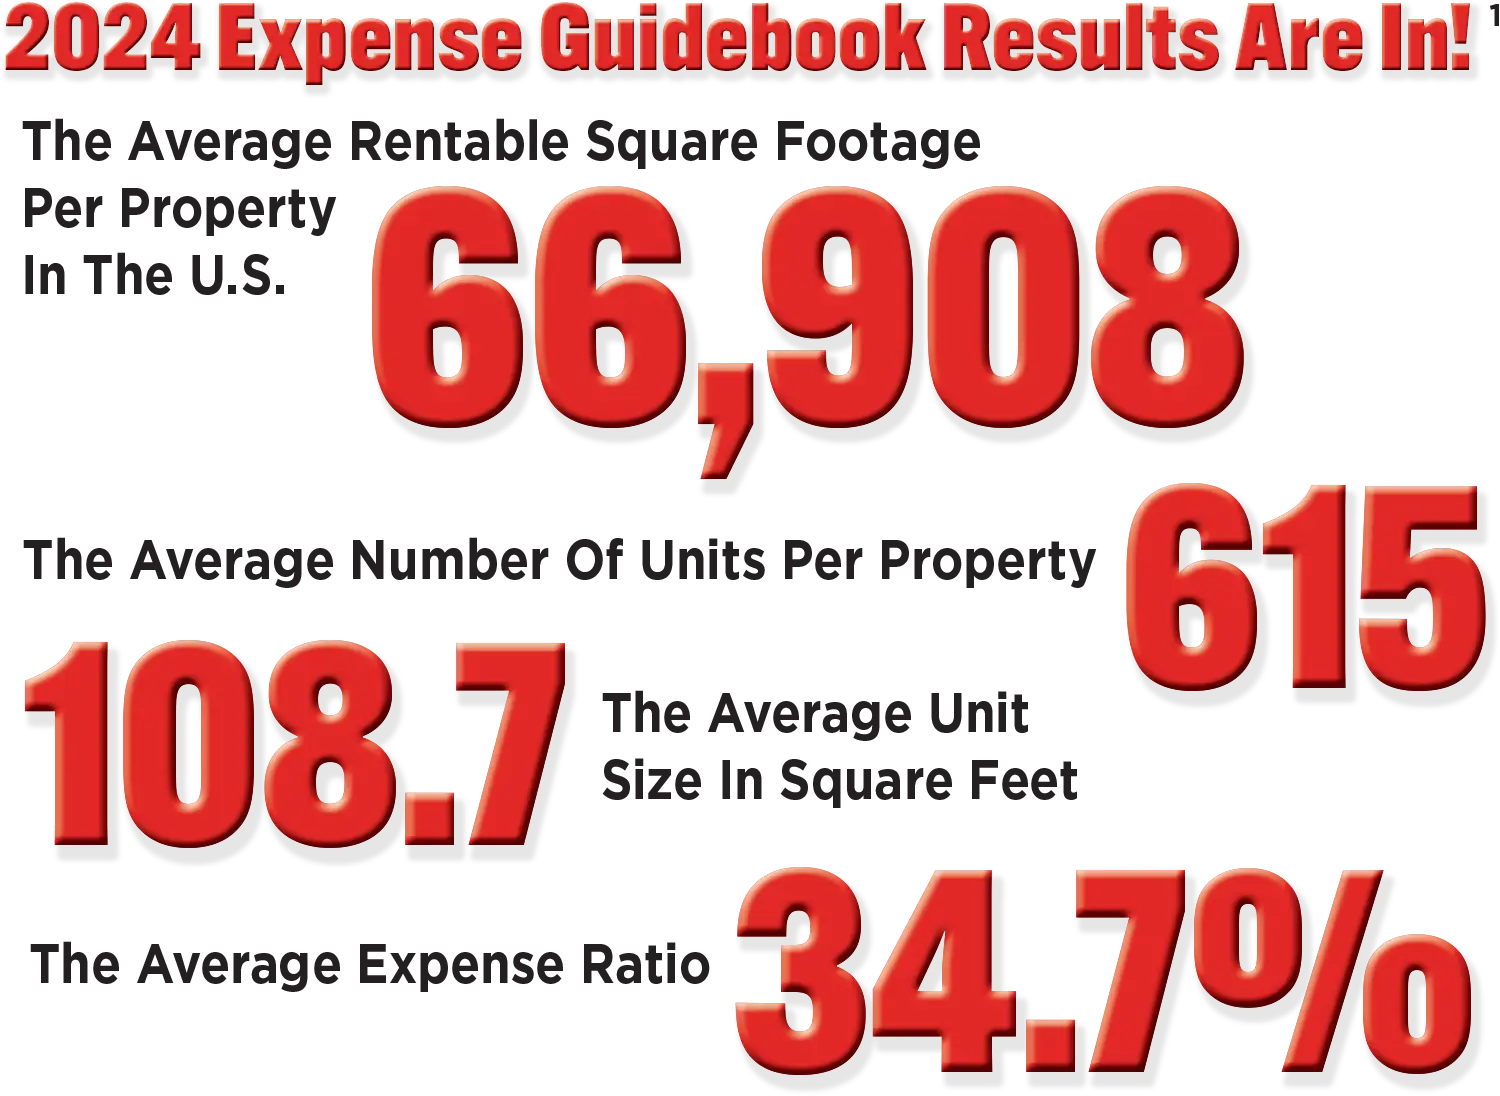 2024 Expense Guidebook Results Are In! The Average Rentable Square Footage Per Property In The U.S. 66,908, The Average Number Of Units Per Property 615, The Average Unit Size In Square Feet 108.7, The Average Expense Ratio 34.7%